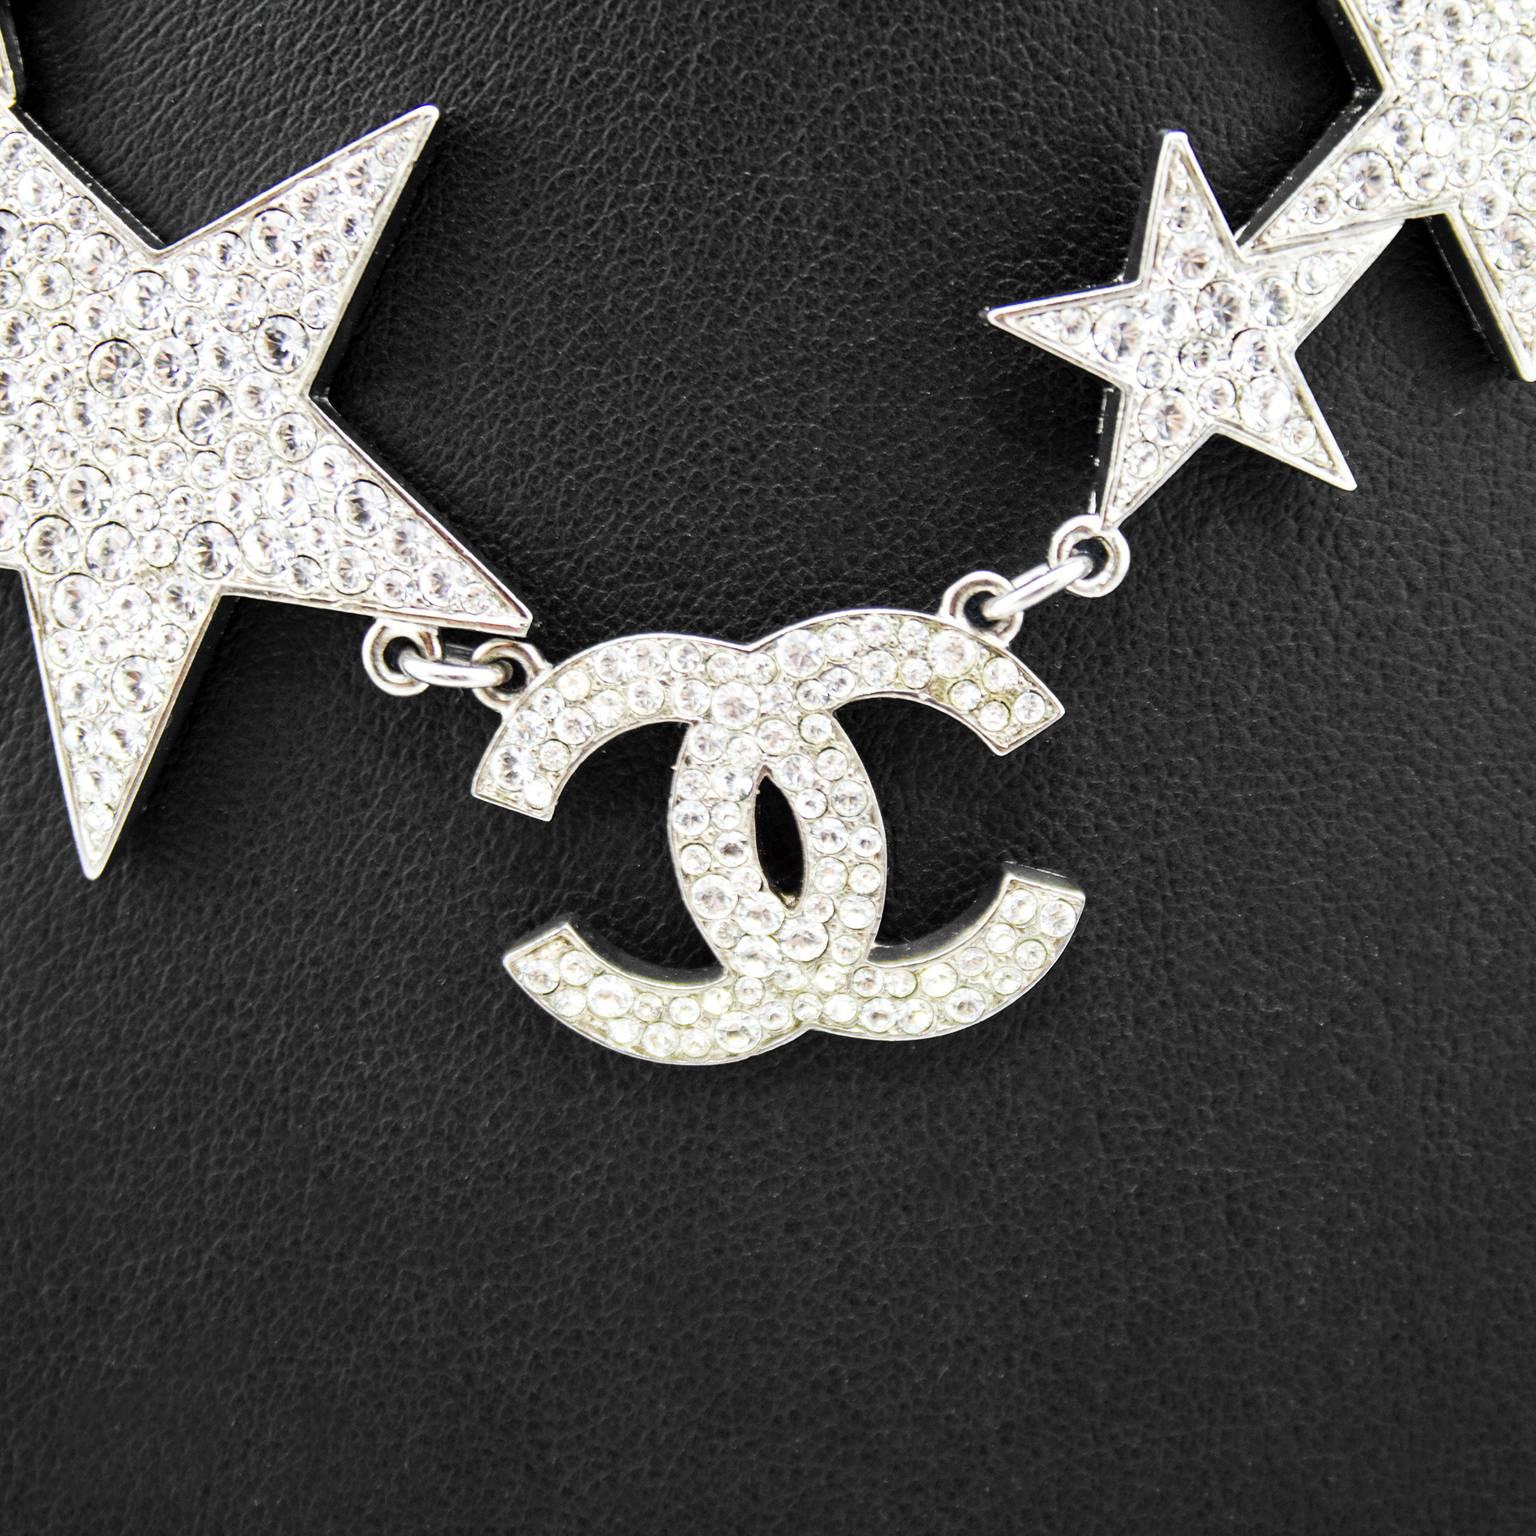 Fabulous Chanel silver metal star choker from the spring 2008 collection. Eleven different sized stars filled with rhinestones lay asymmetrically across the neck with a rhinestone encrusted cc logo just off middle. Tiny chain link wraps around the